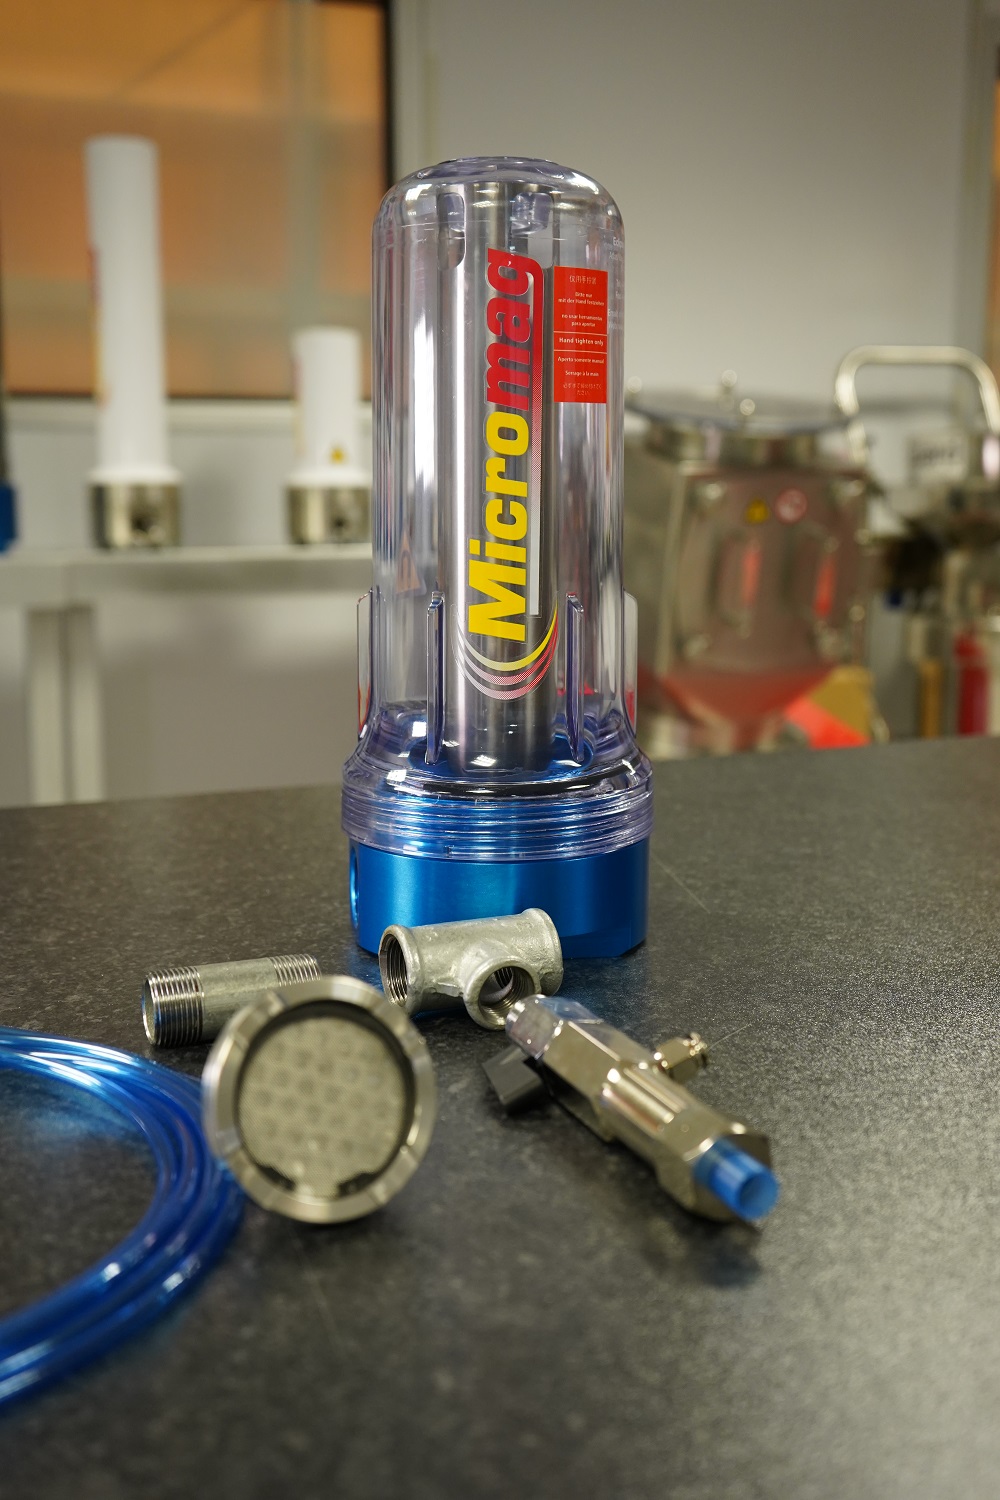 The new MagSaver Kit saves up to 50% of coolant and oil while simultaneously cleaning it.